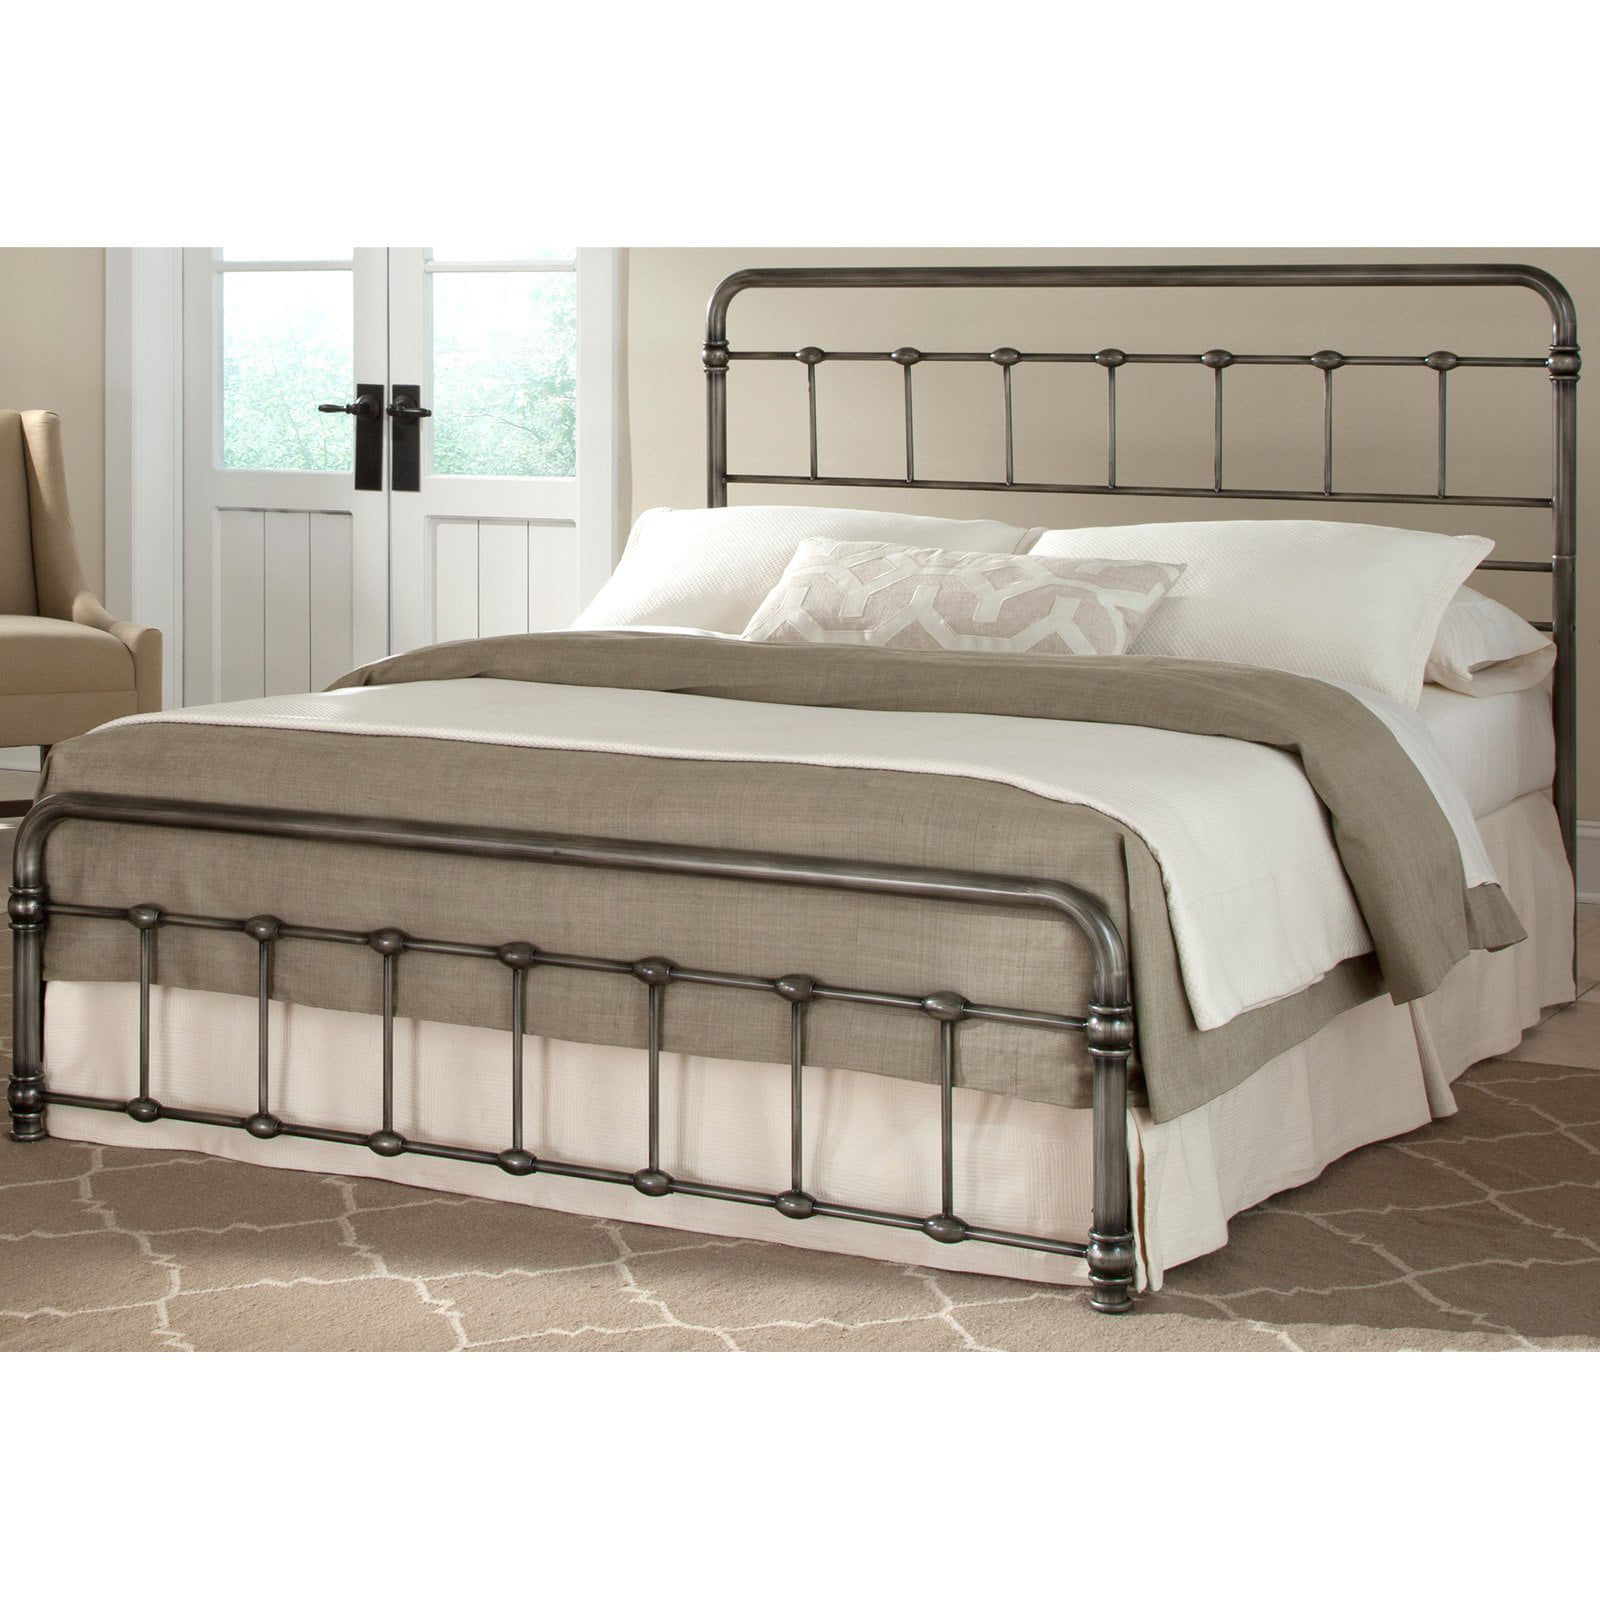 Fremont Metal Snap Bed With Folding, Fashion Bed Frame